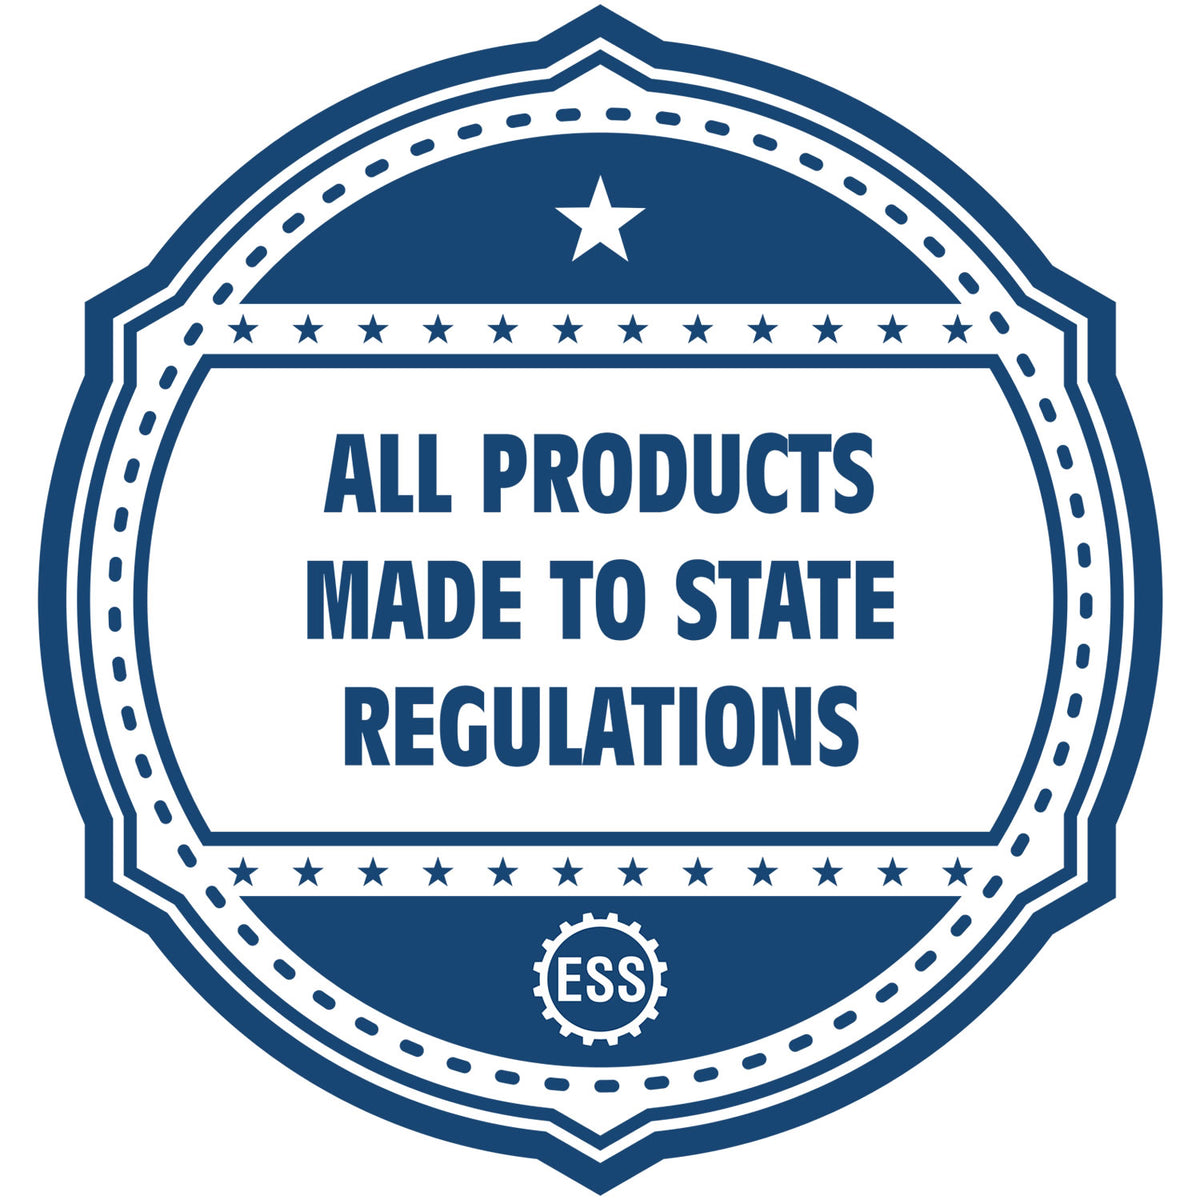 A blue icon or badge for the Gift Alabama Landscape Architect Seal showing that this product is made in compliance with state regulations.